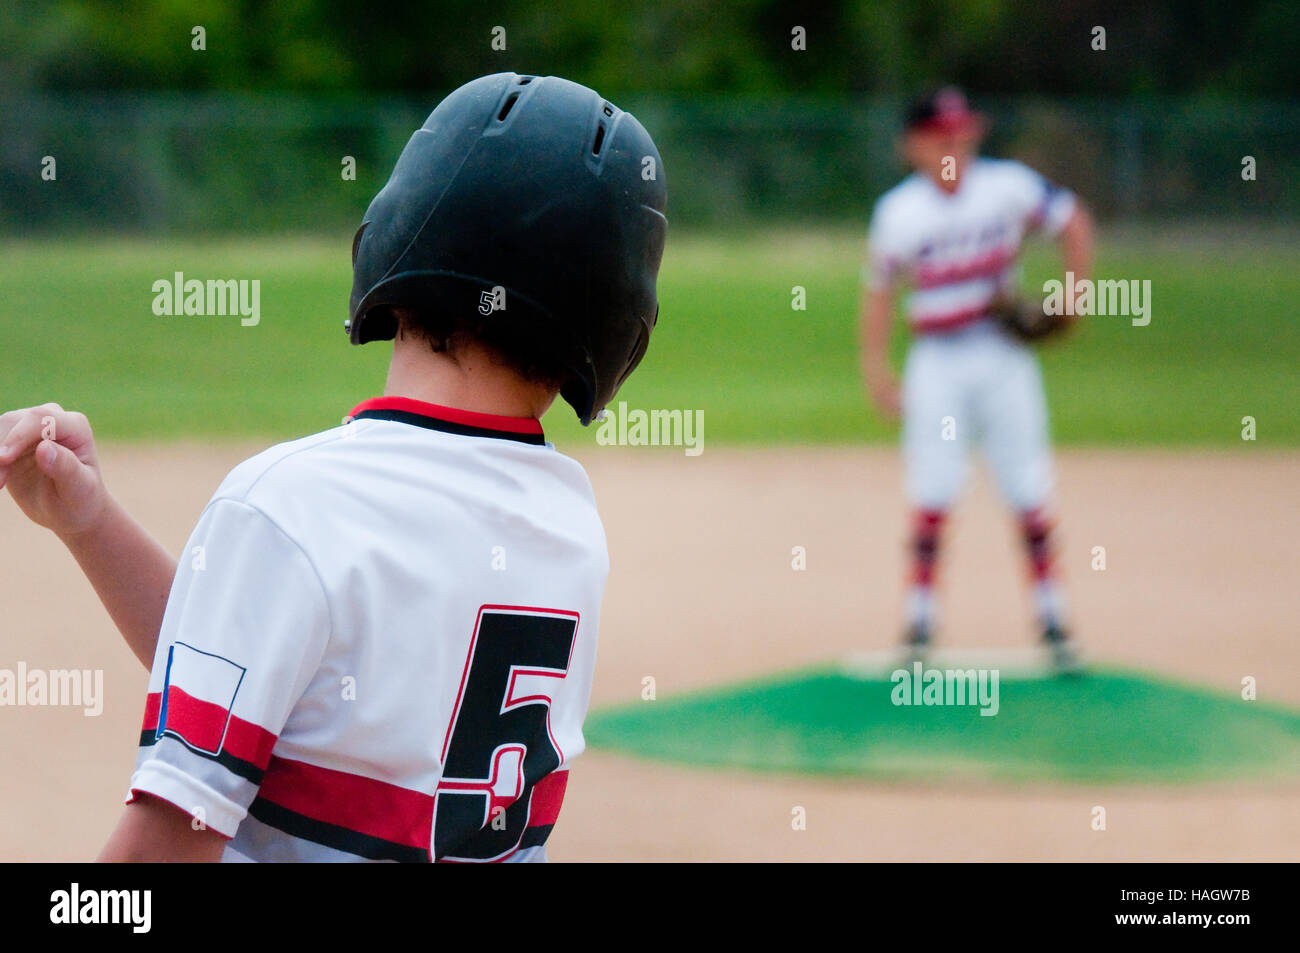 Rearview close-up of youth baseball player. Stock Photo